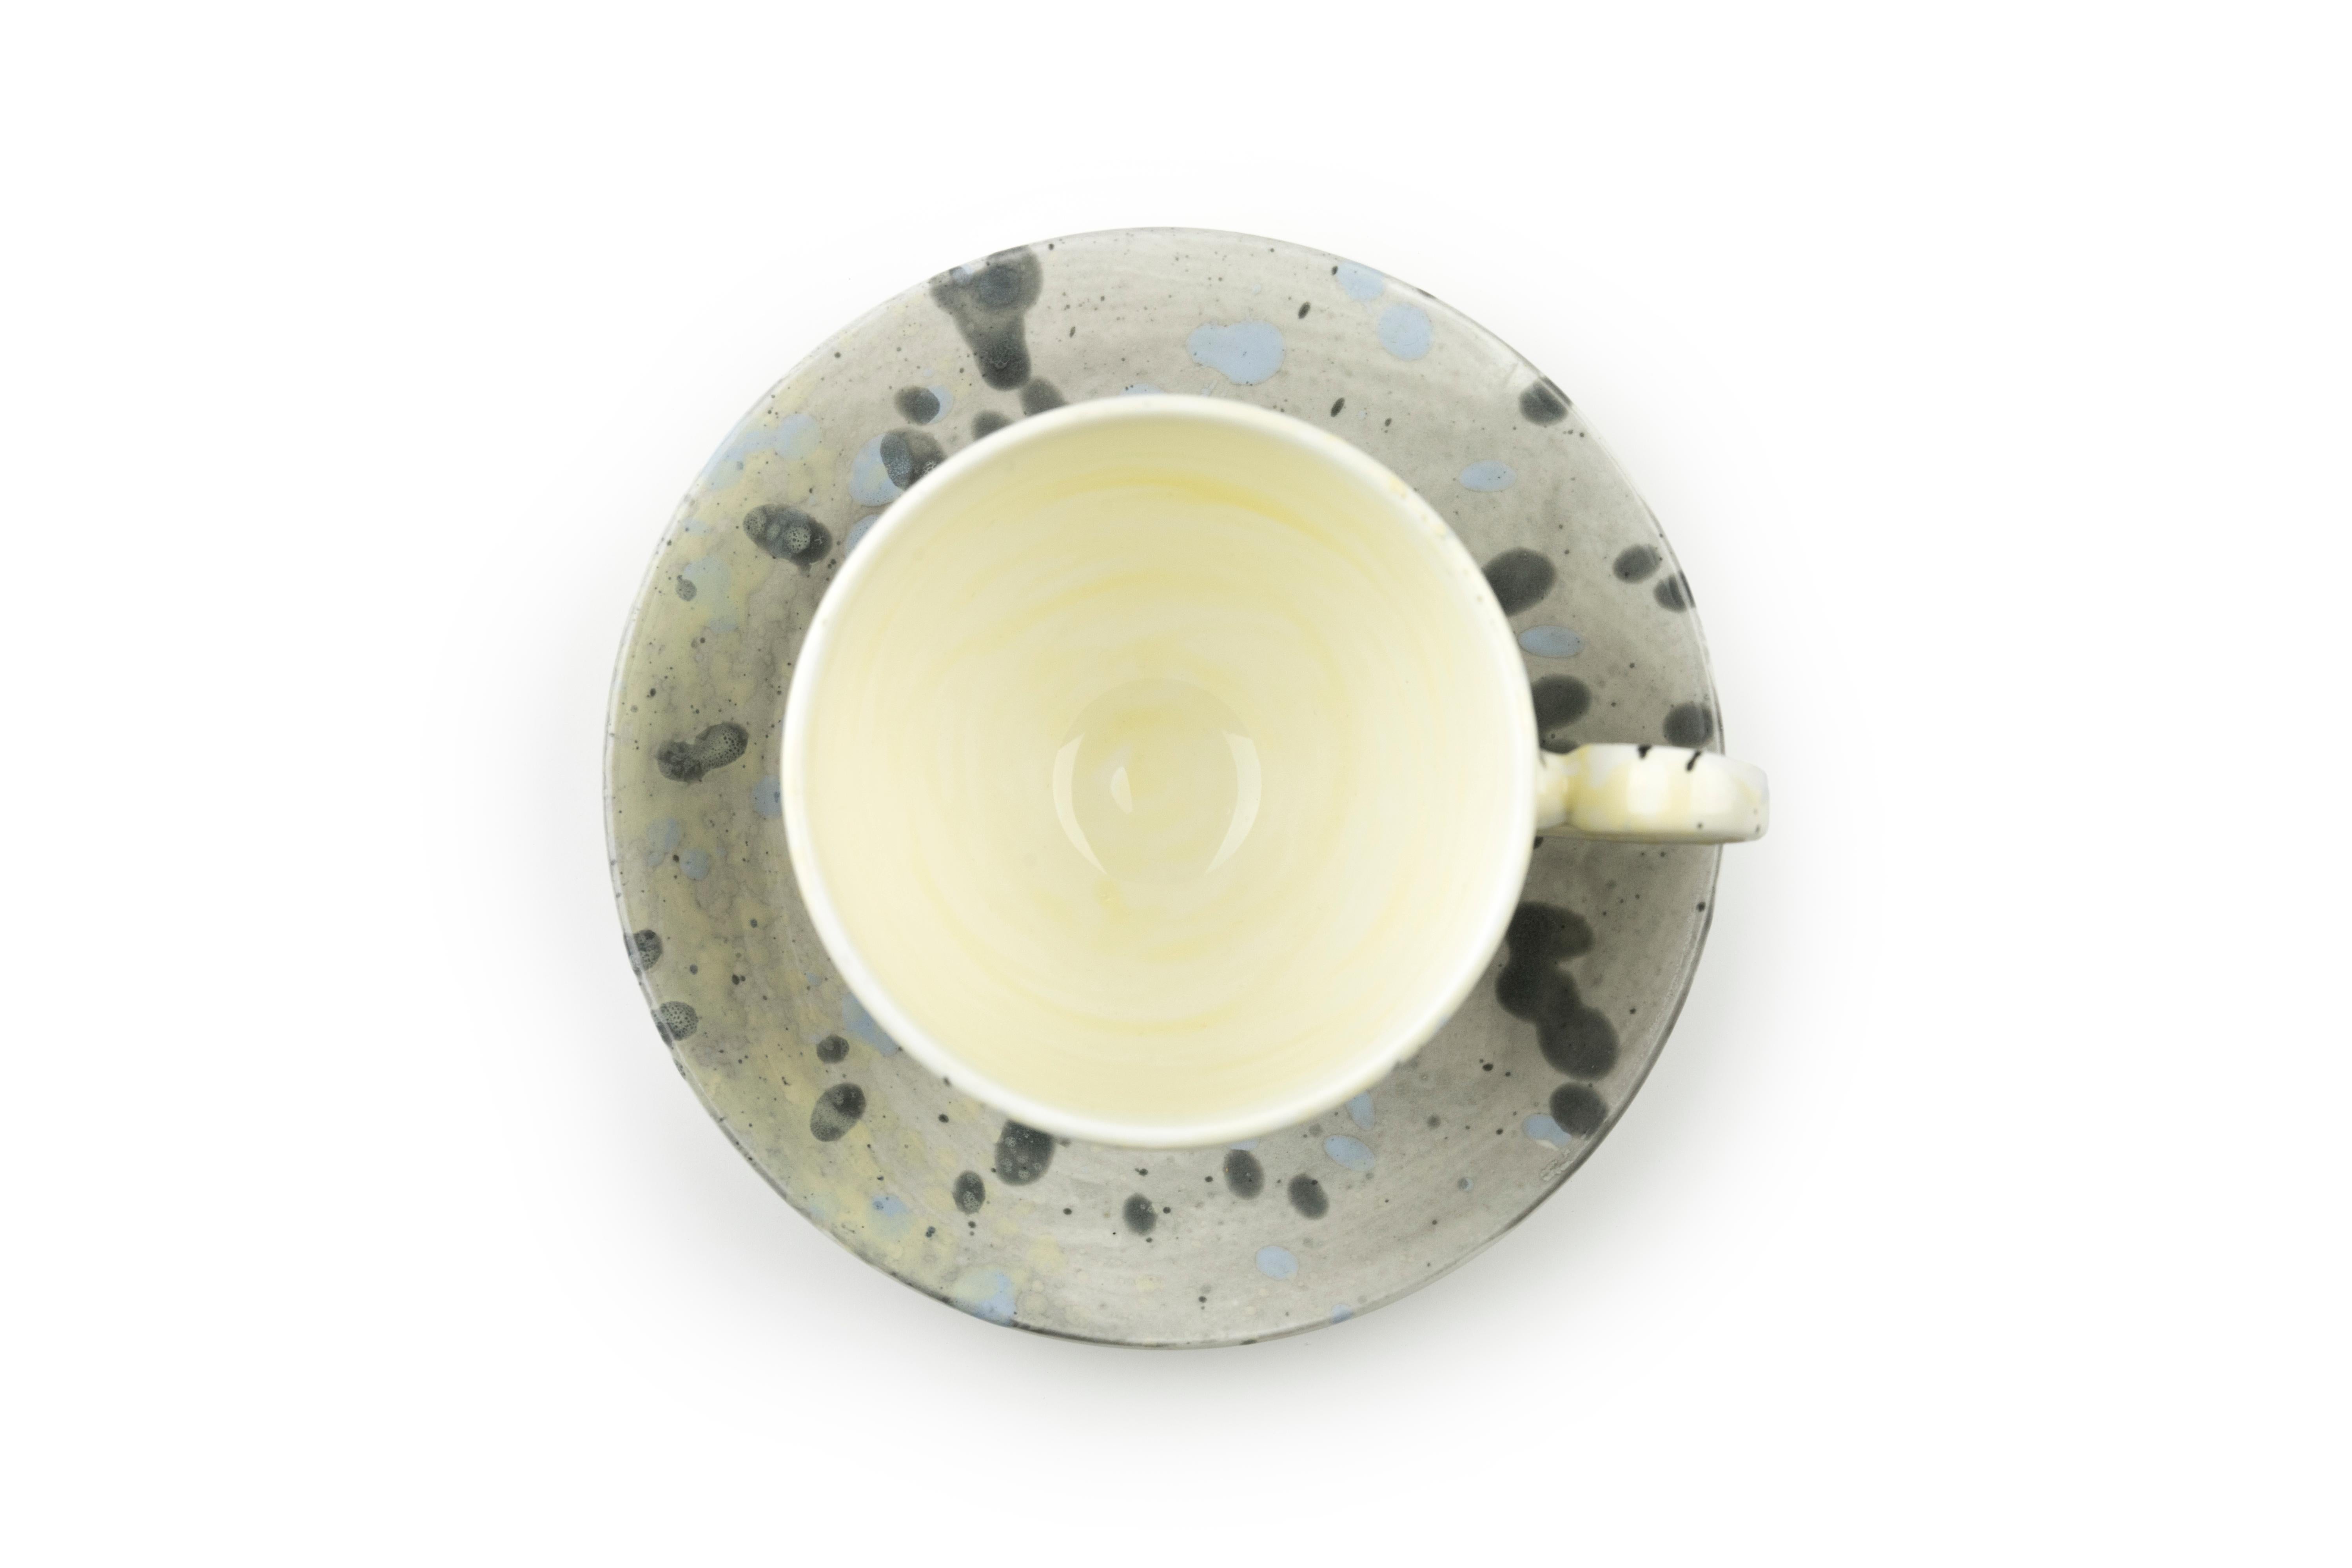 This tea cup and saucer are available in a variety of colors and finishes to be mixed and matched. When purchasing this set please specify the color and finish for each item. 

Color options:
Solid grey
Solid blue
Grey splatter
Yellow